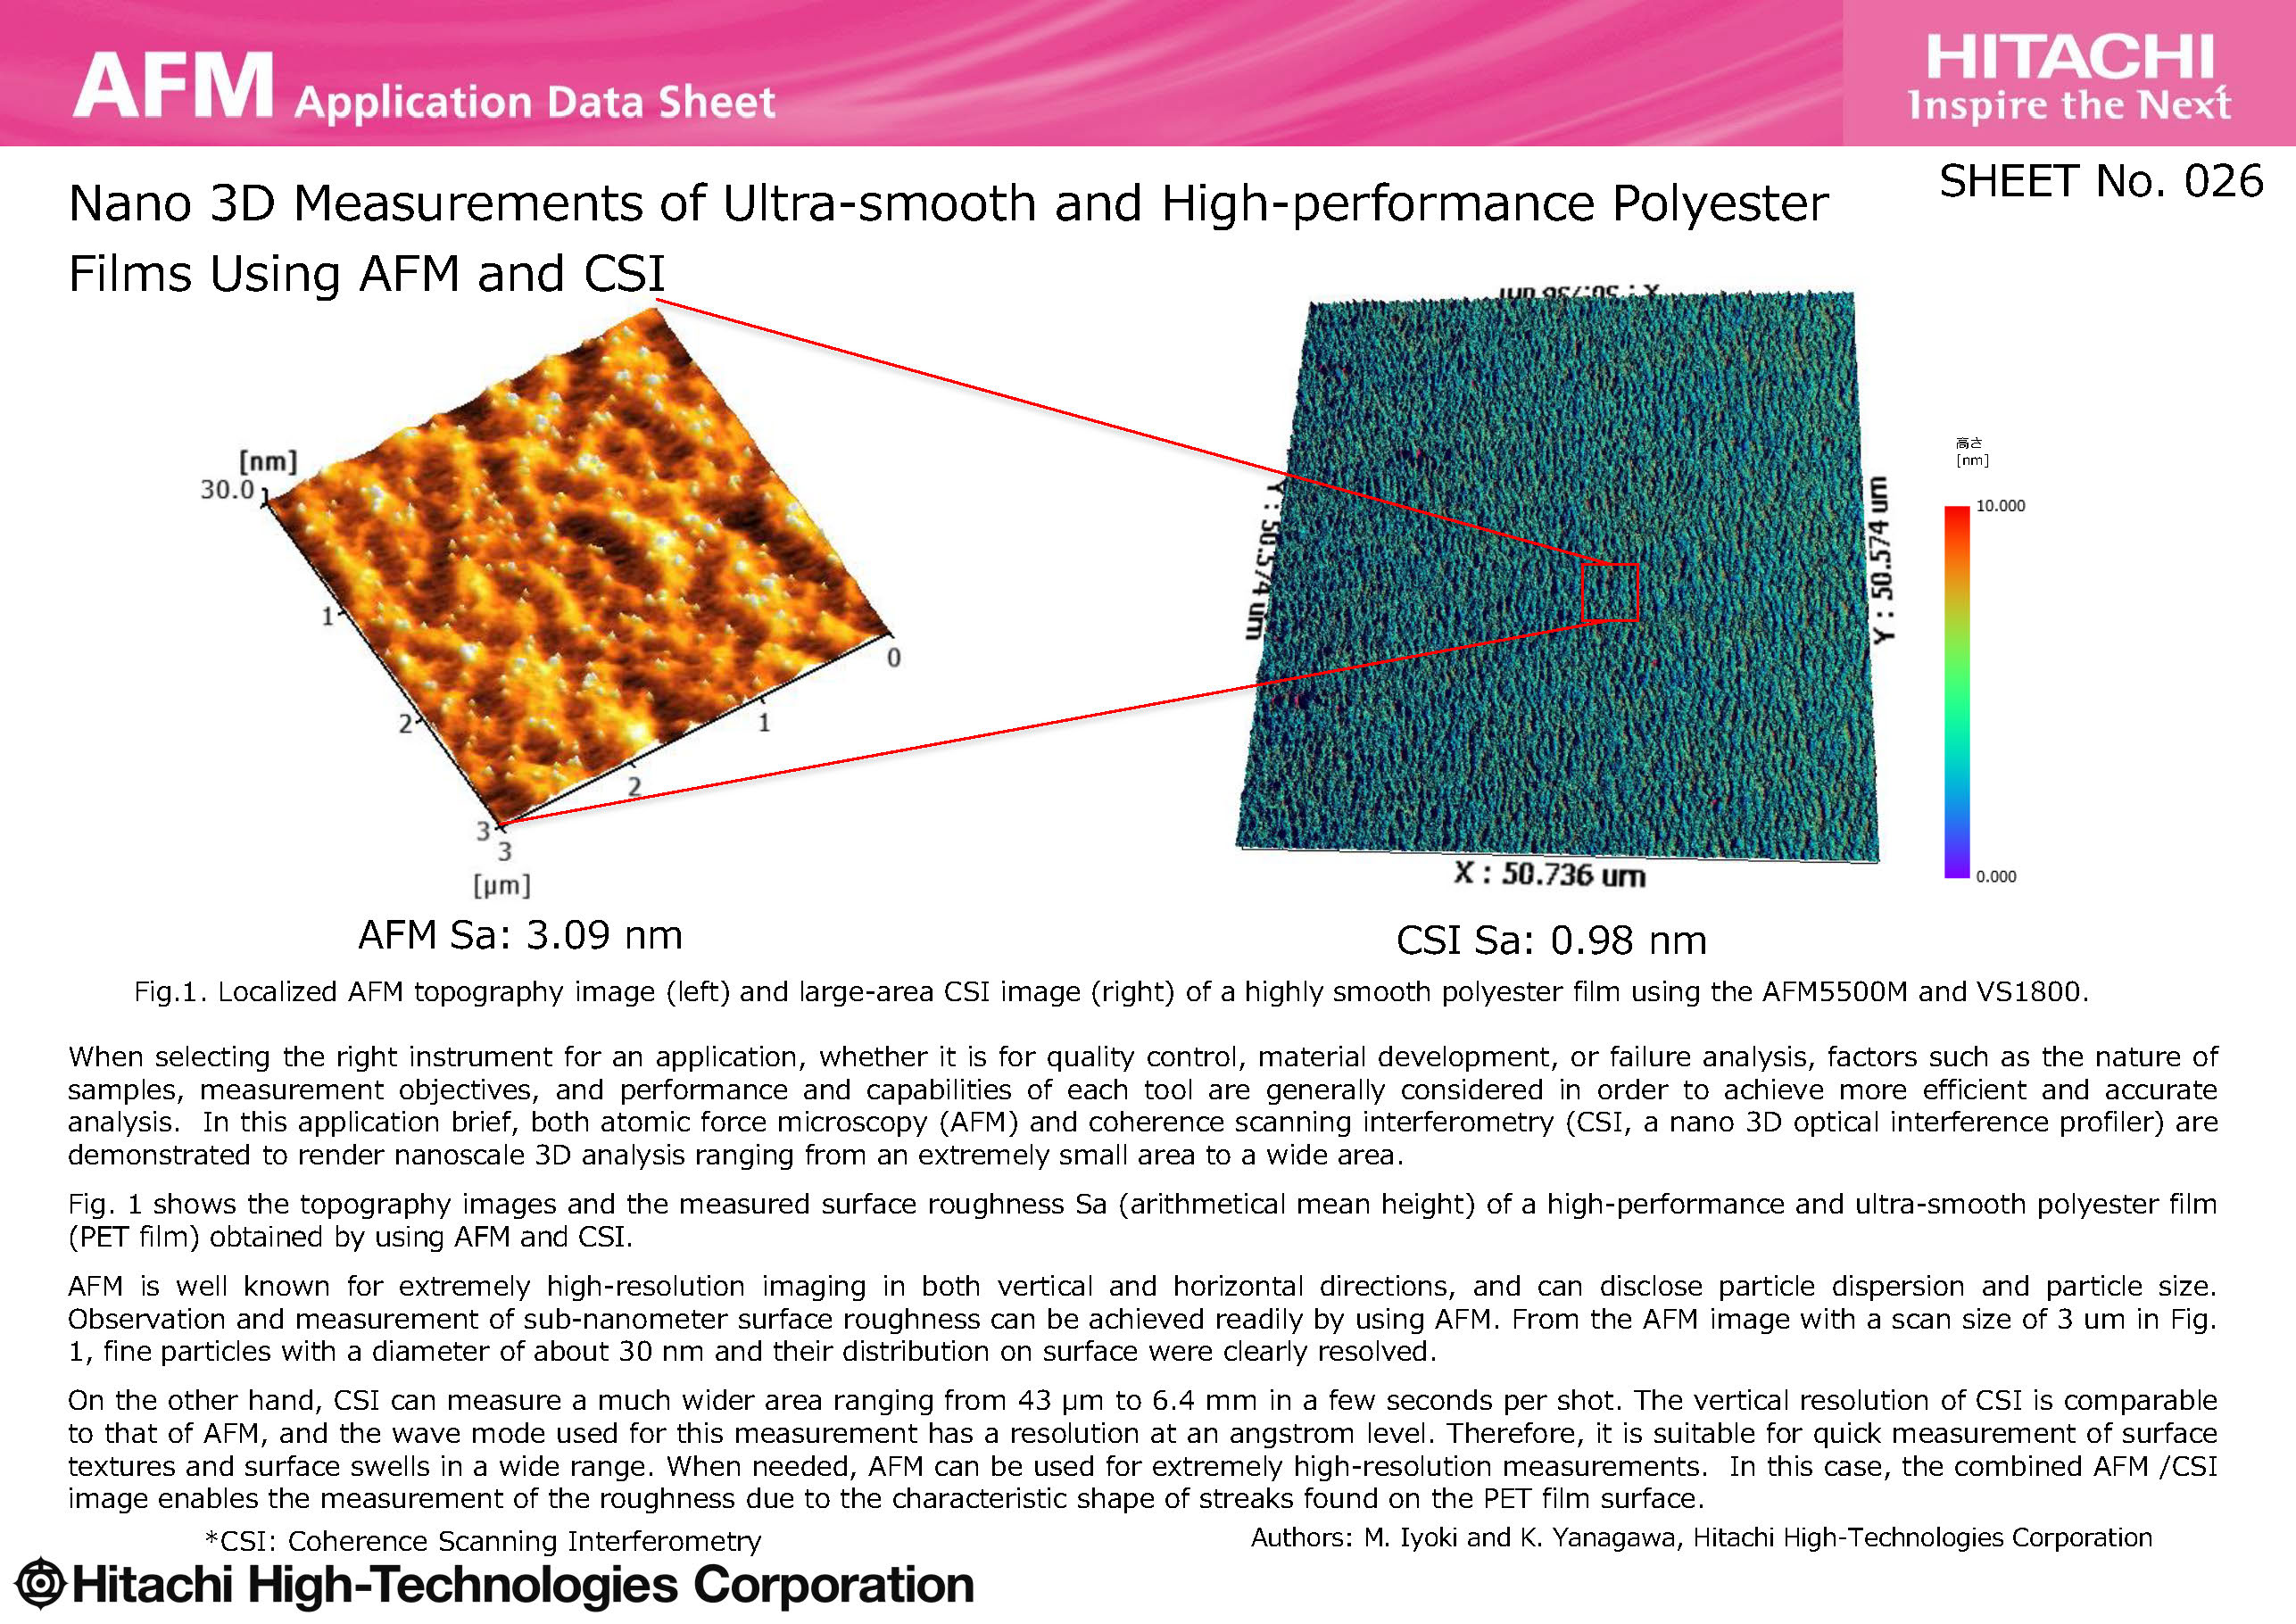 Nano 3D Measurements of Ultra-smooth and High-performance Polyester Films Using AFM and CSI